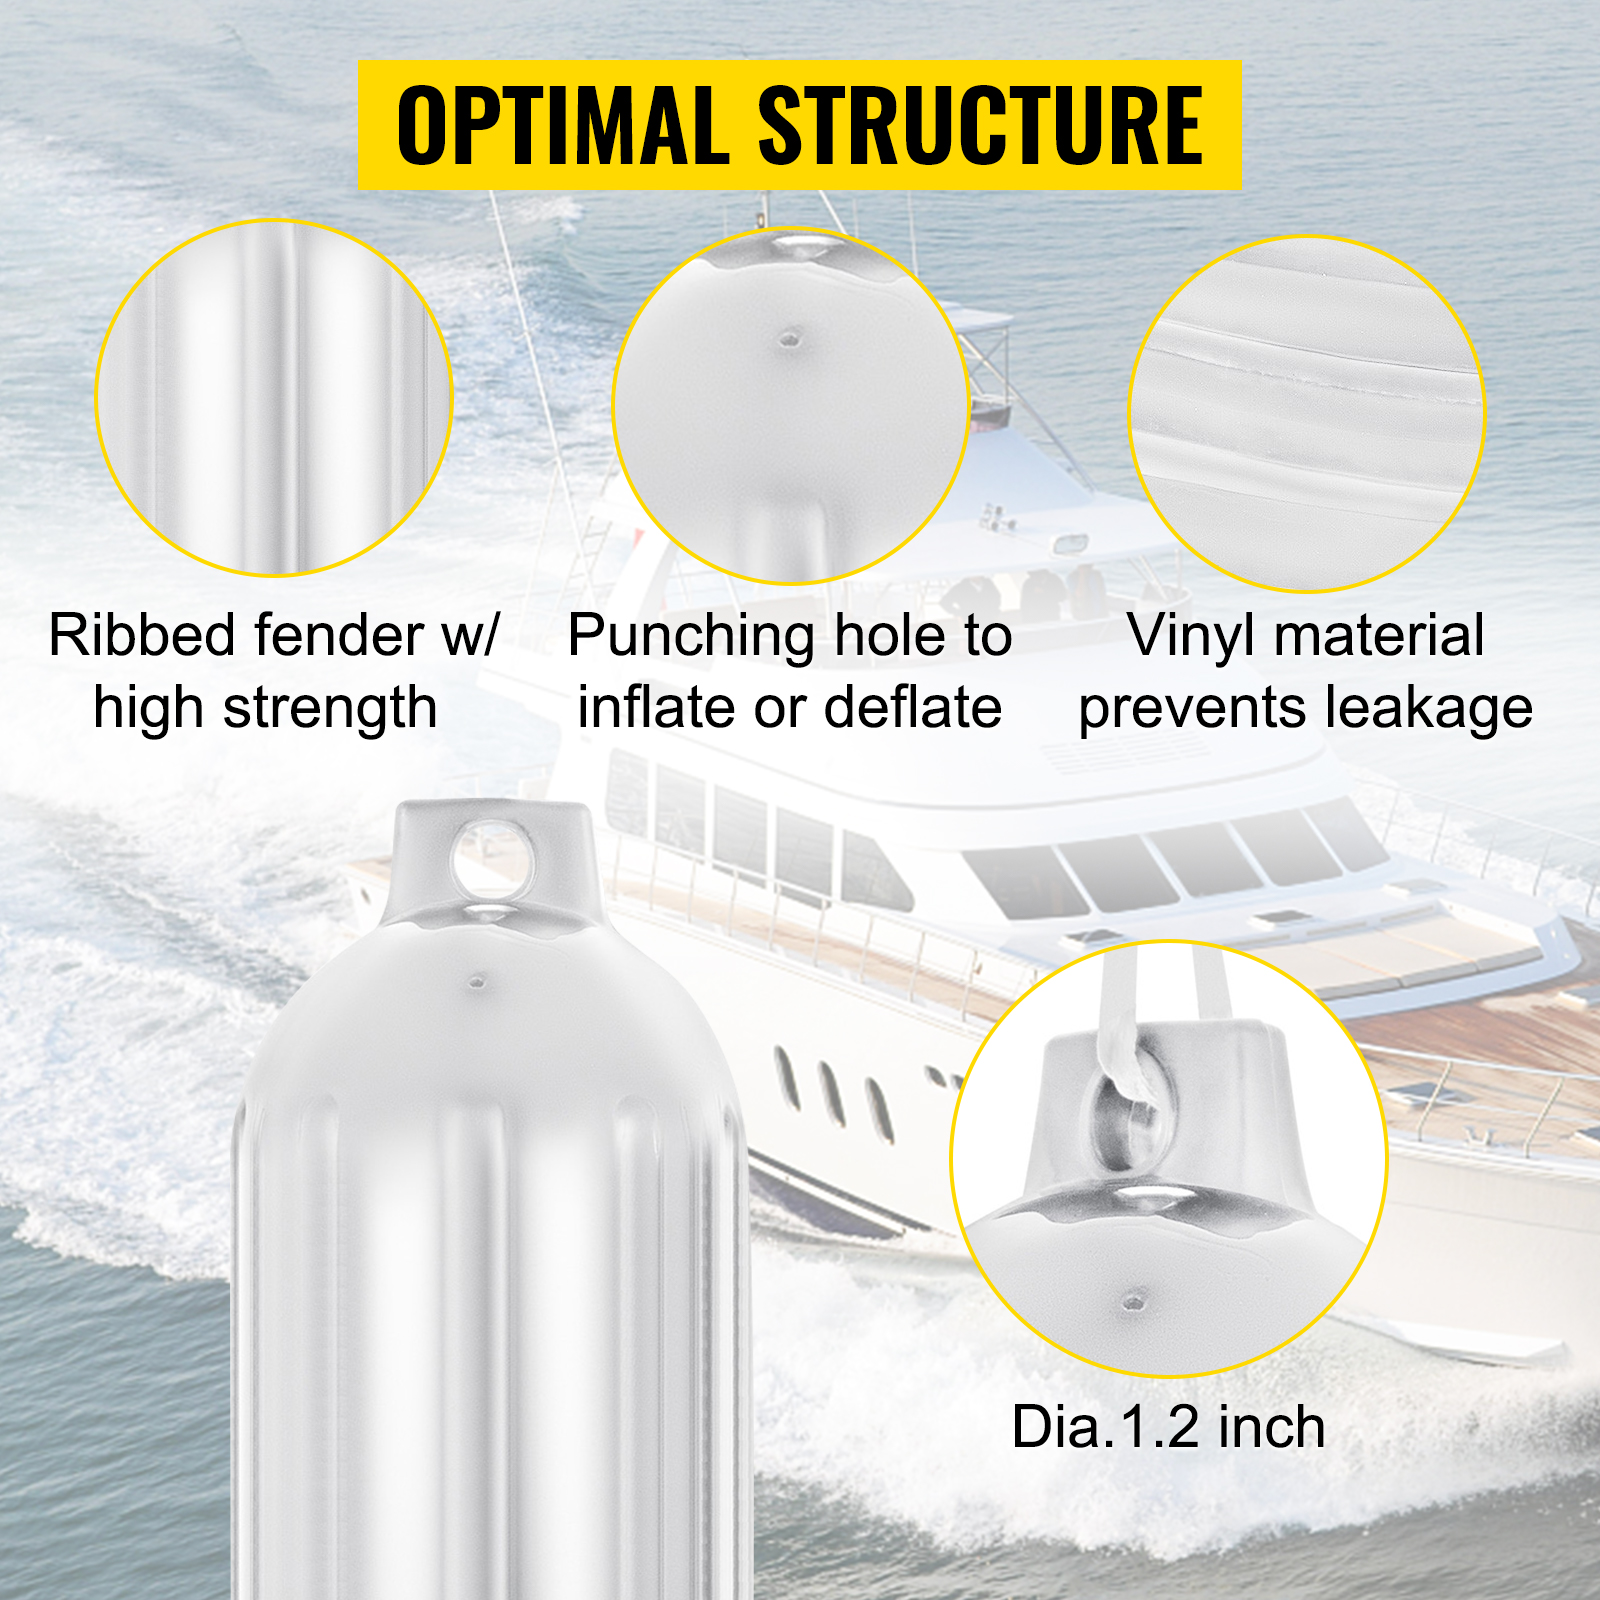 Details about   NEW 27" Boat Fenders Hand Inflatable Marine Bumper Shield Buffer Protection 4Pcs 